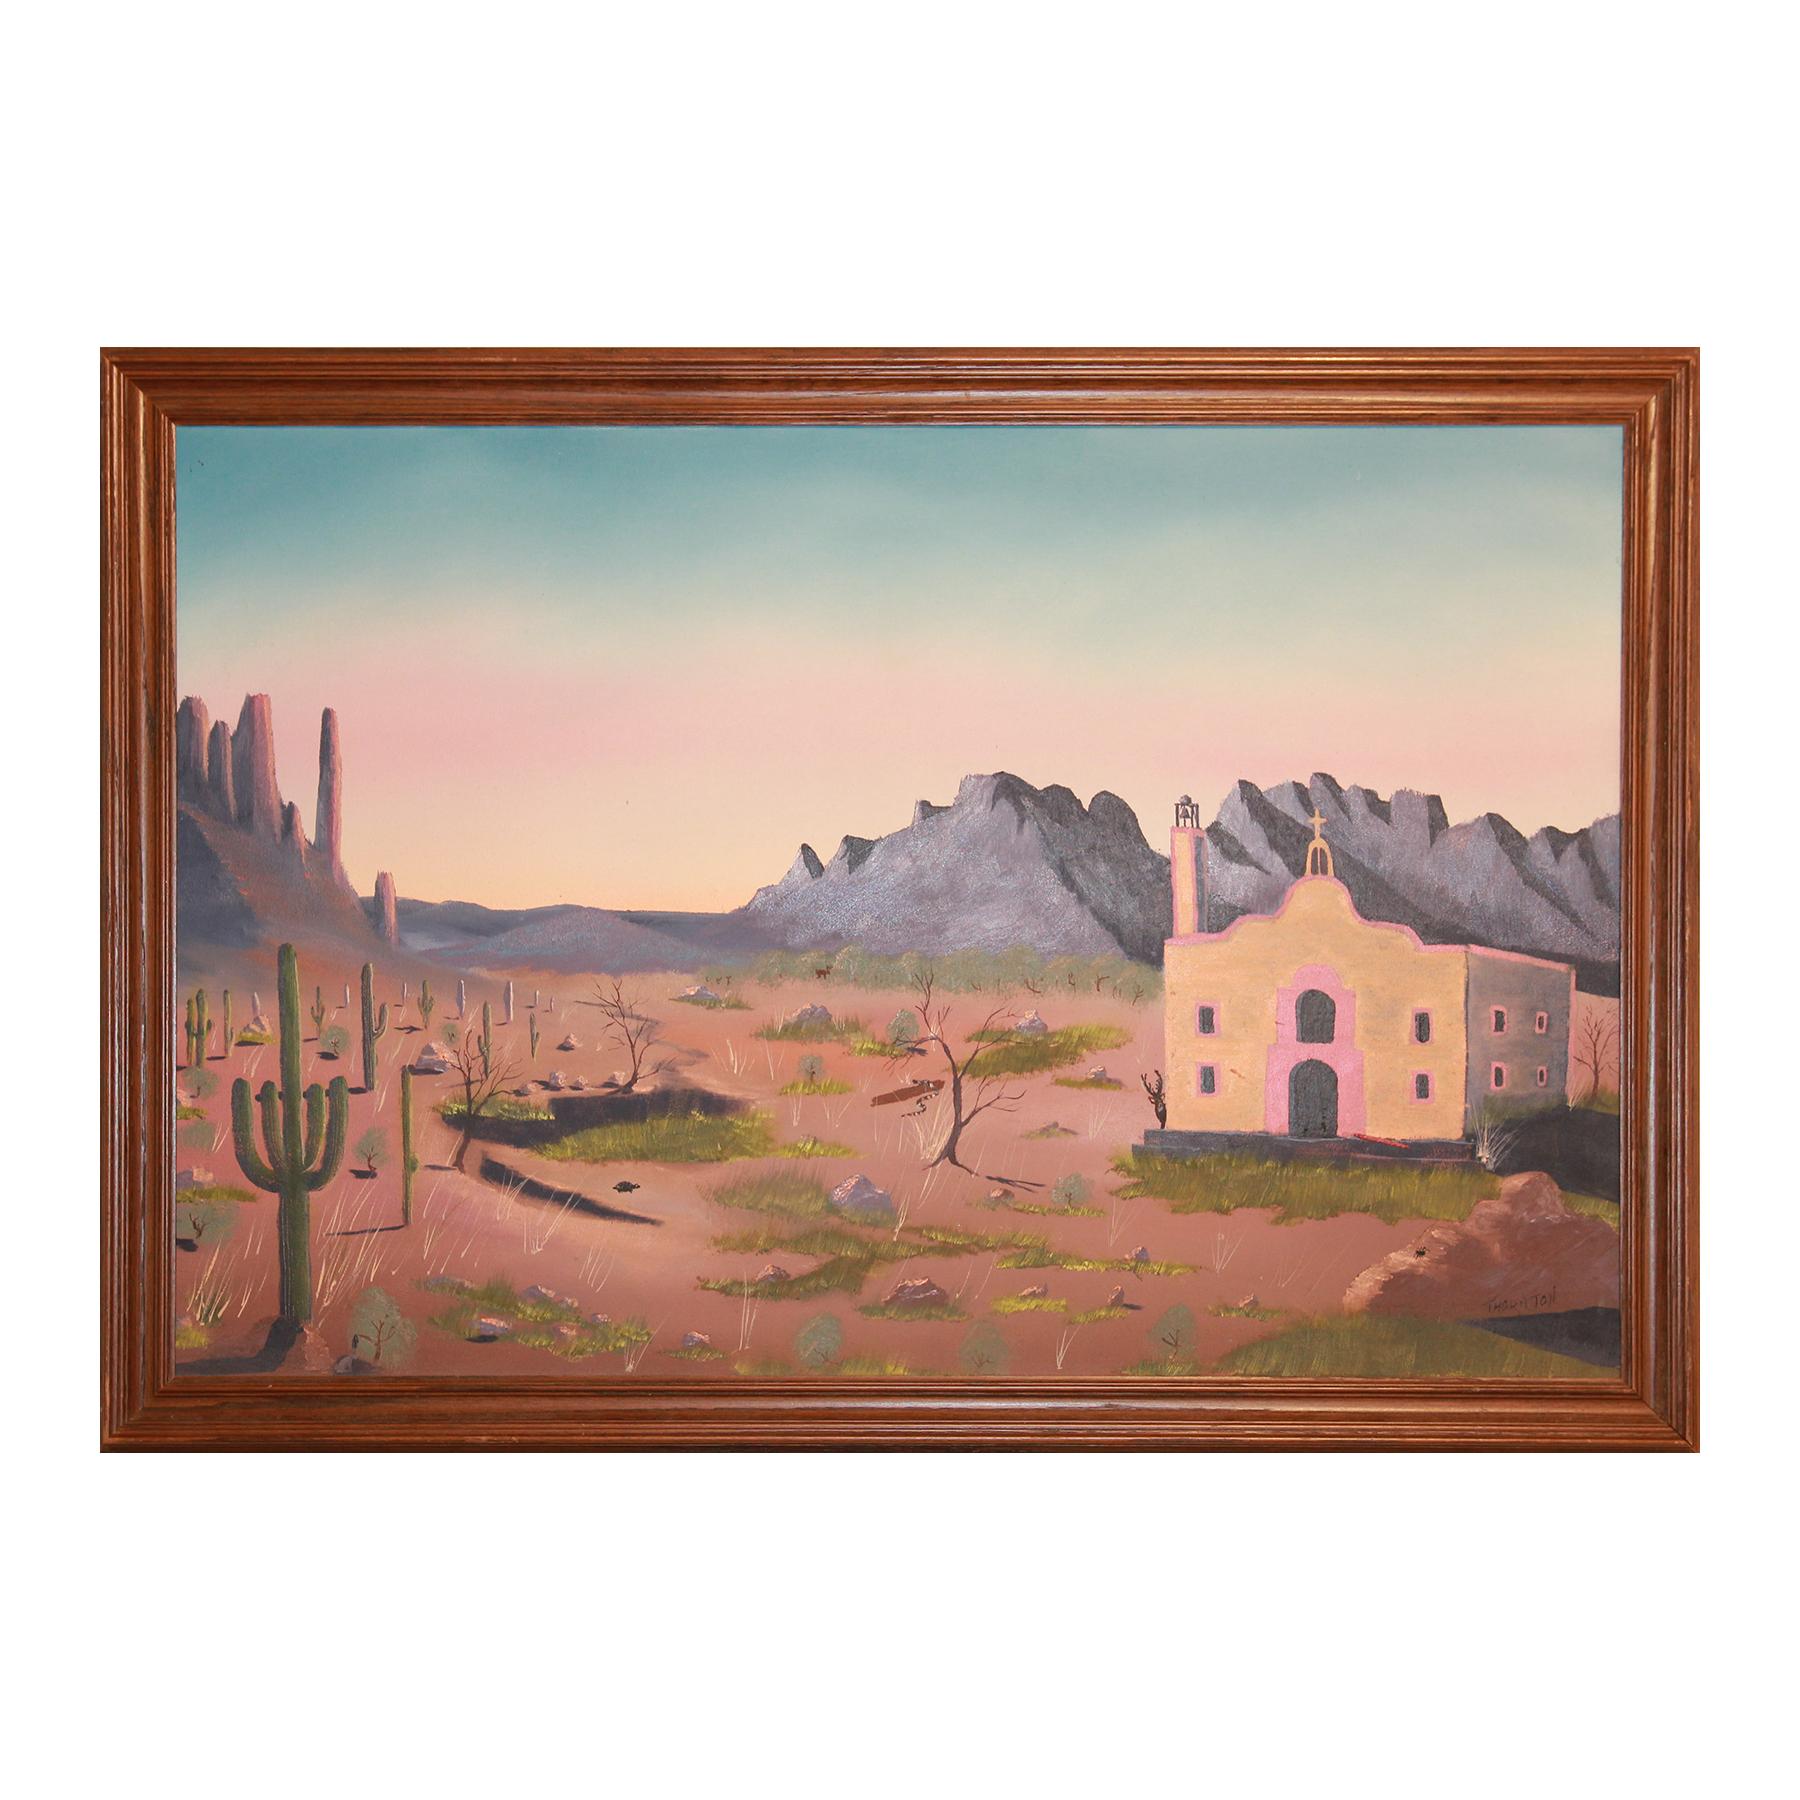 Unknown Abstract Painting - Abstract Pink and Purple Desert Landscape with Cacti and Animals Signed Thornton